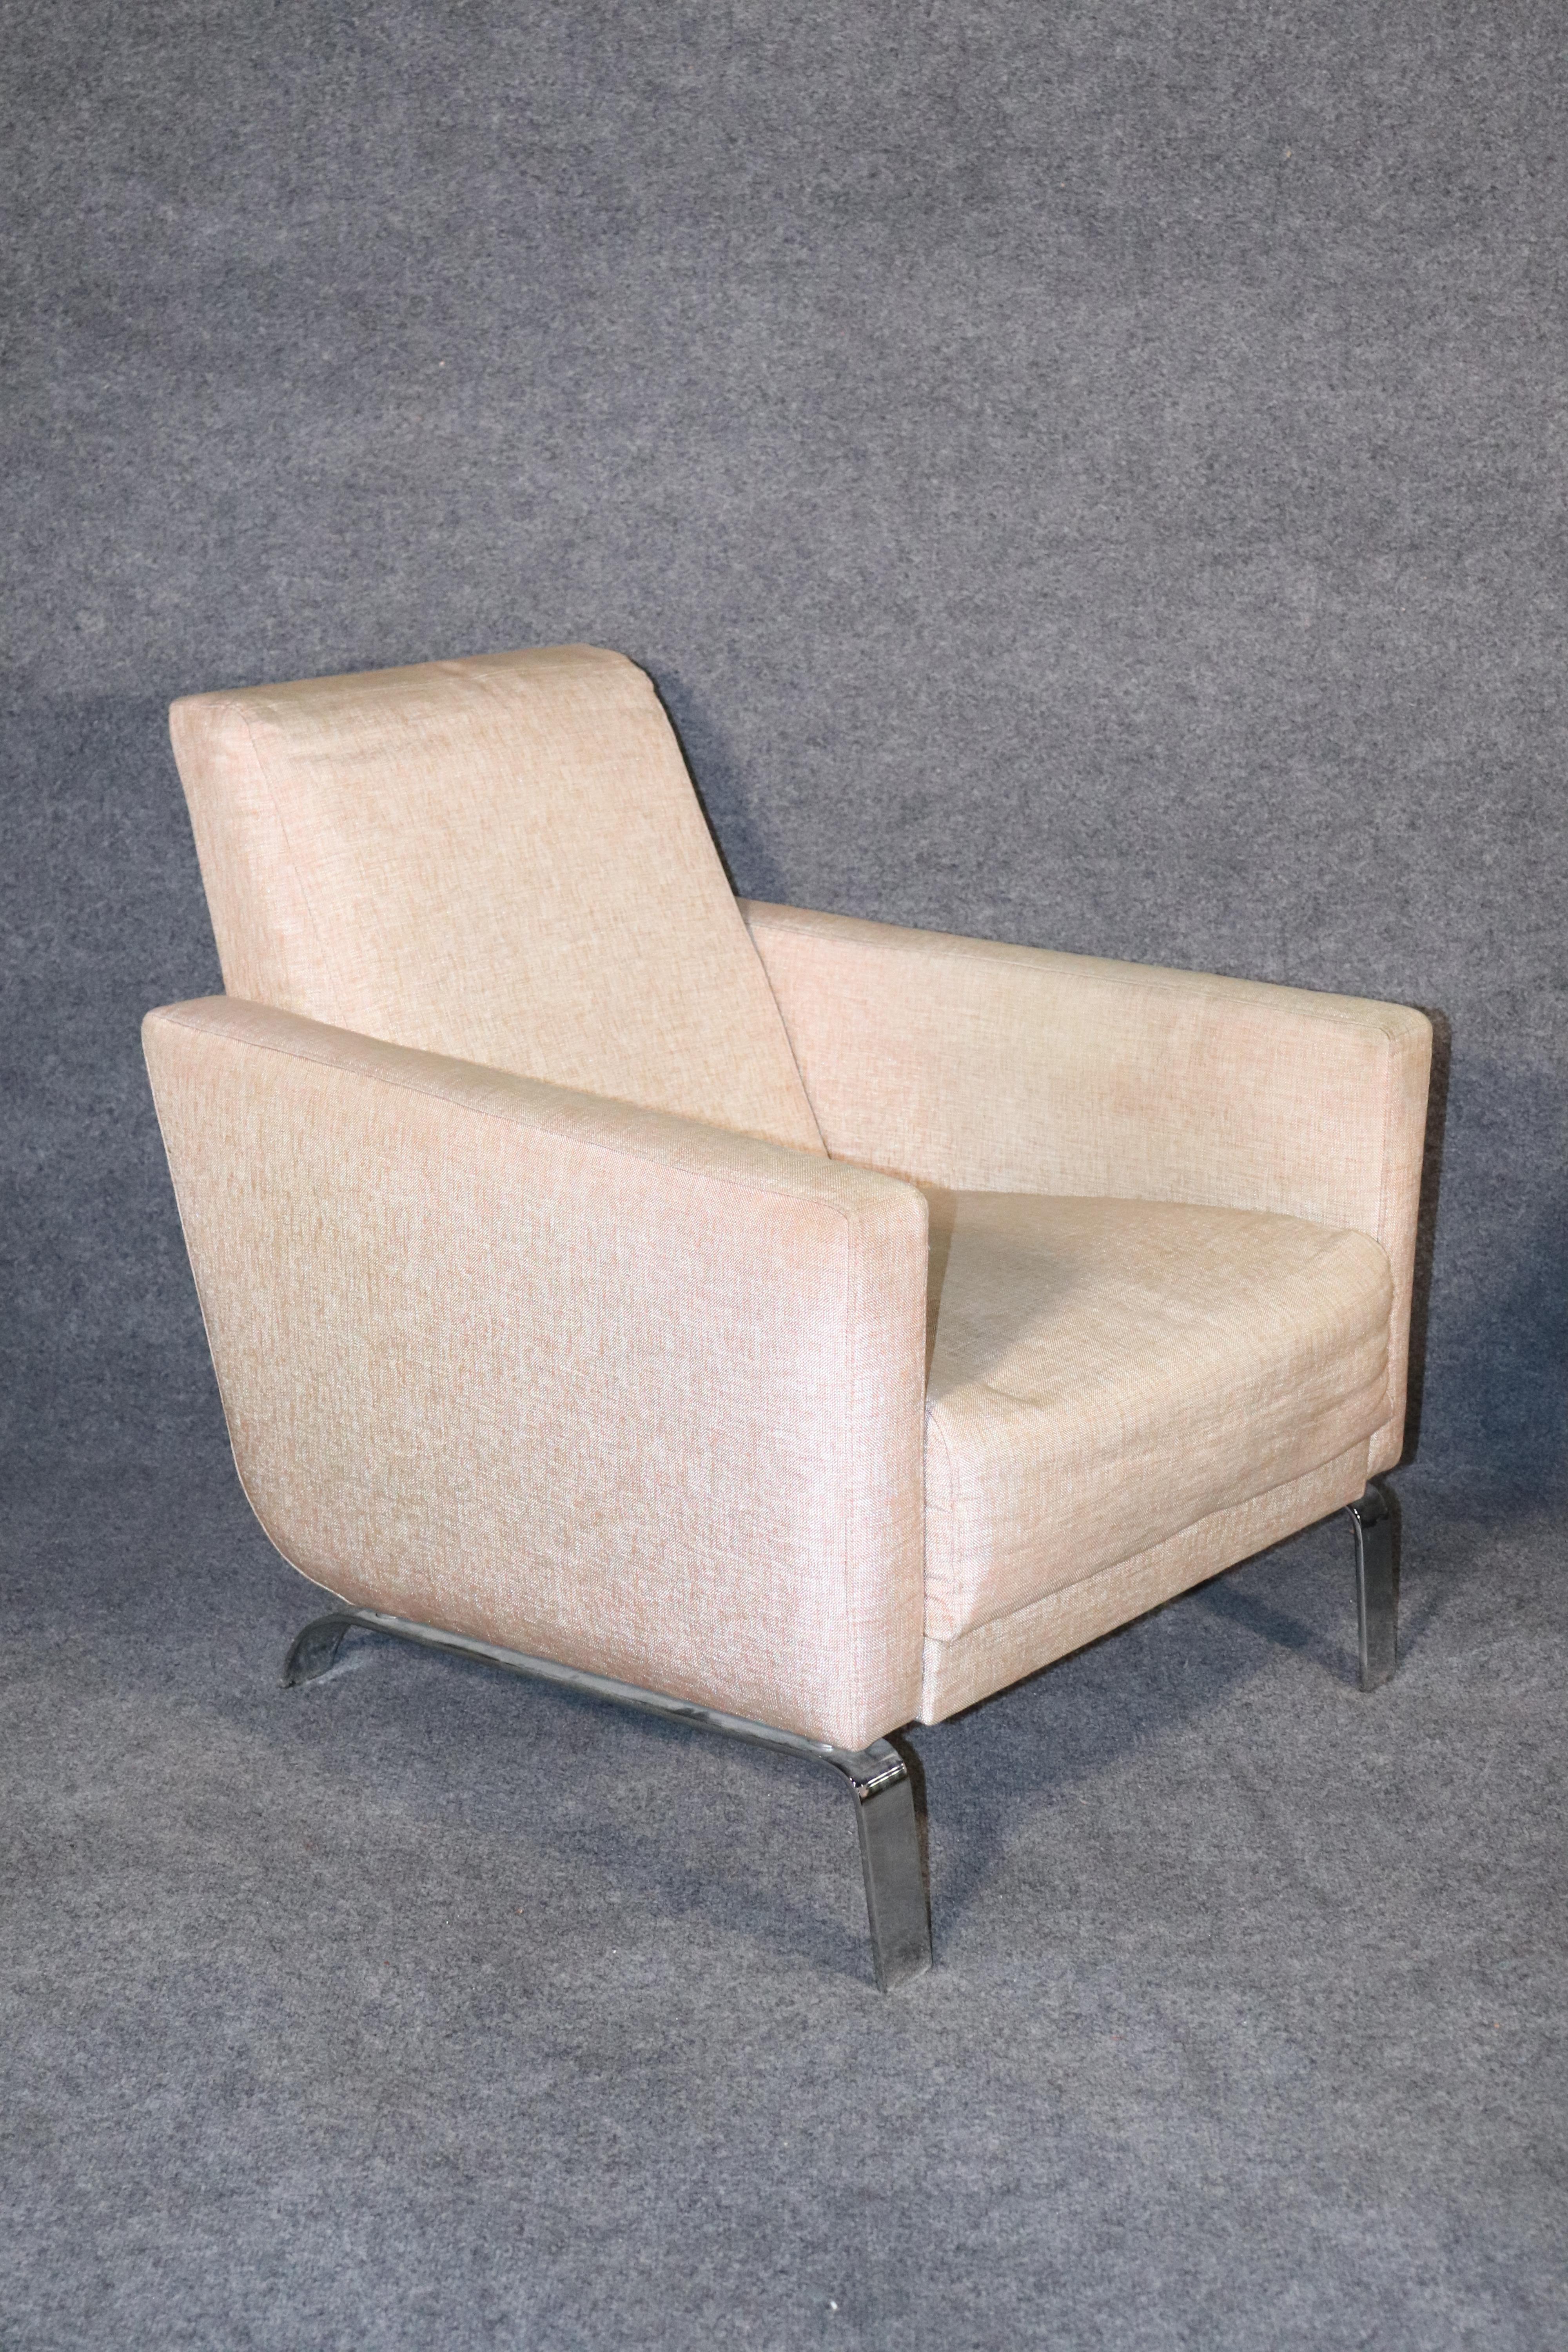 Pair of vintage armchairs made by BoConcept. Their 